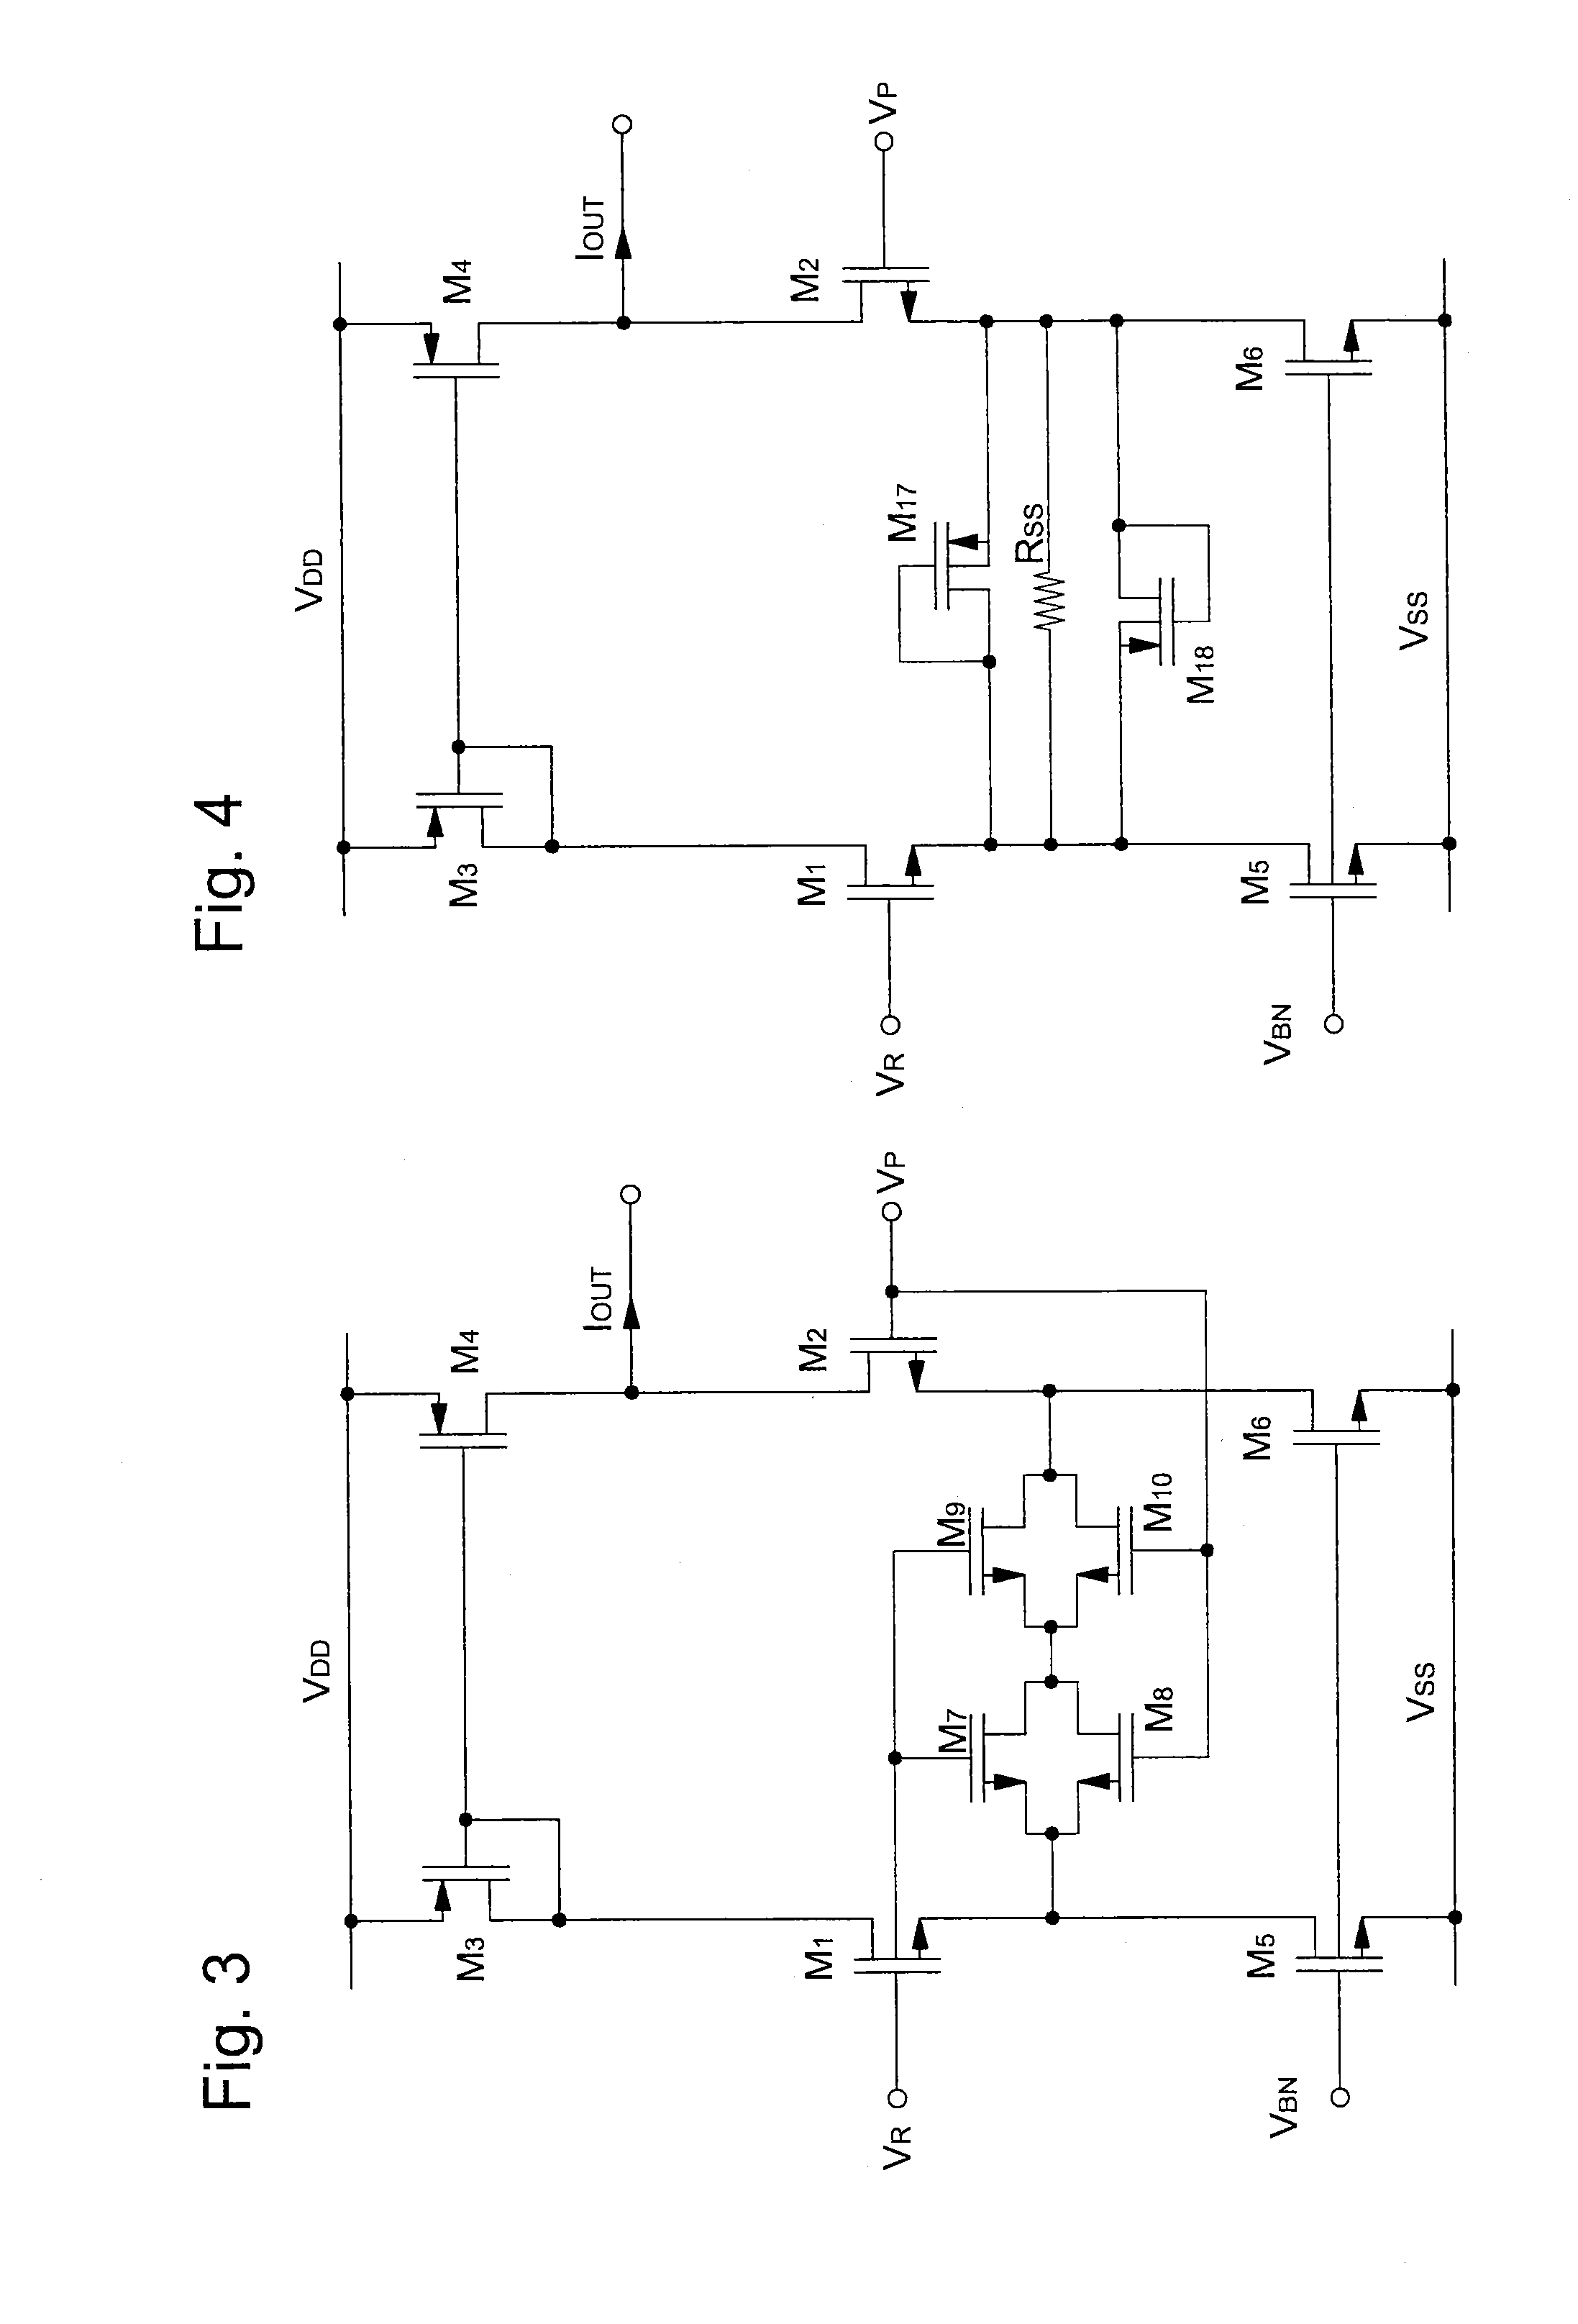 Automatic gain control electronic circuit with dual slope for an amplifier